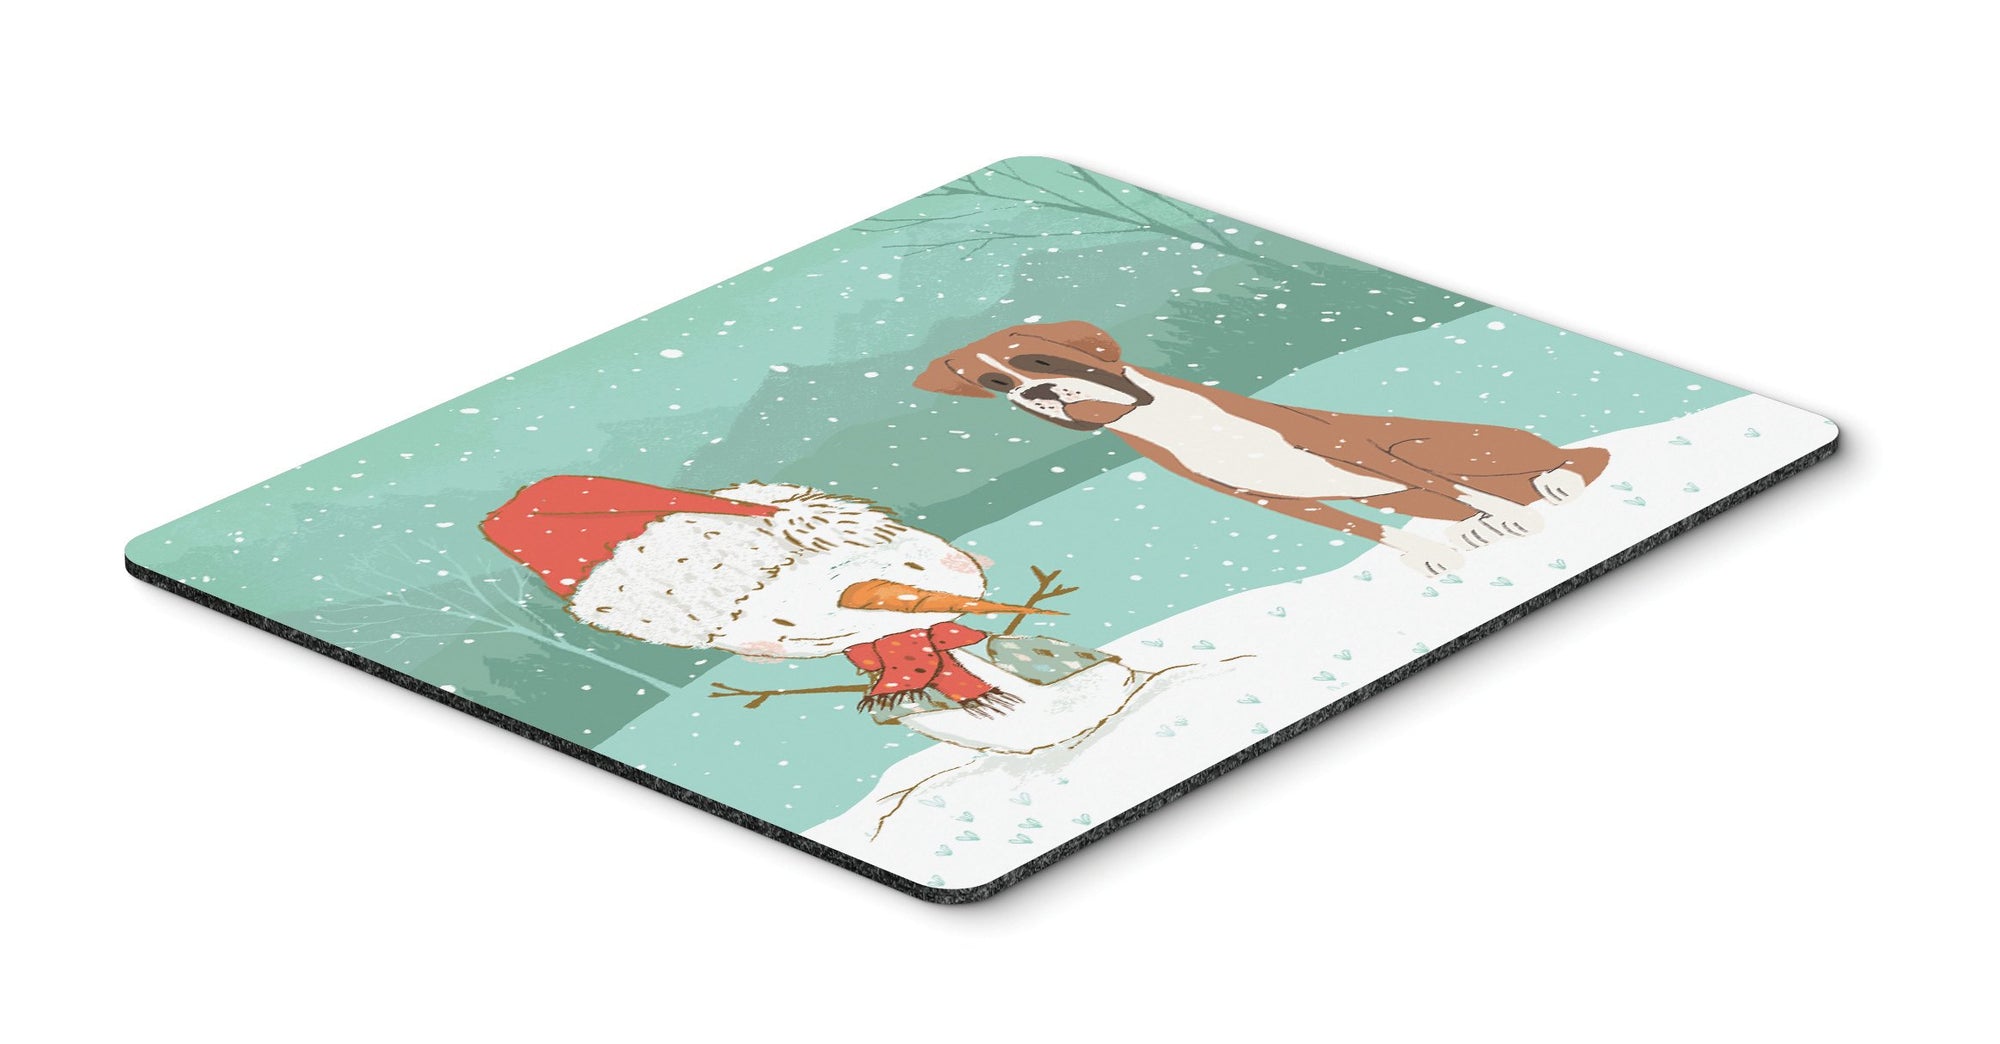 Fawn Boxer and Snowman Christmas Mouse Pad, Hot Pad or Trivet CK2036MP by Caroline's Treasures